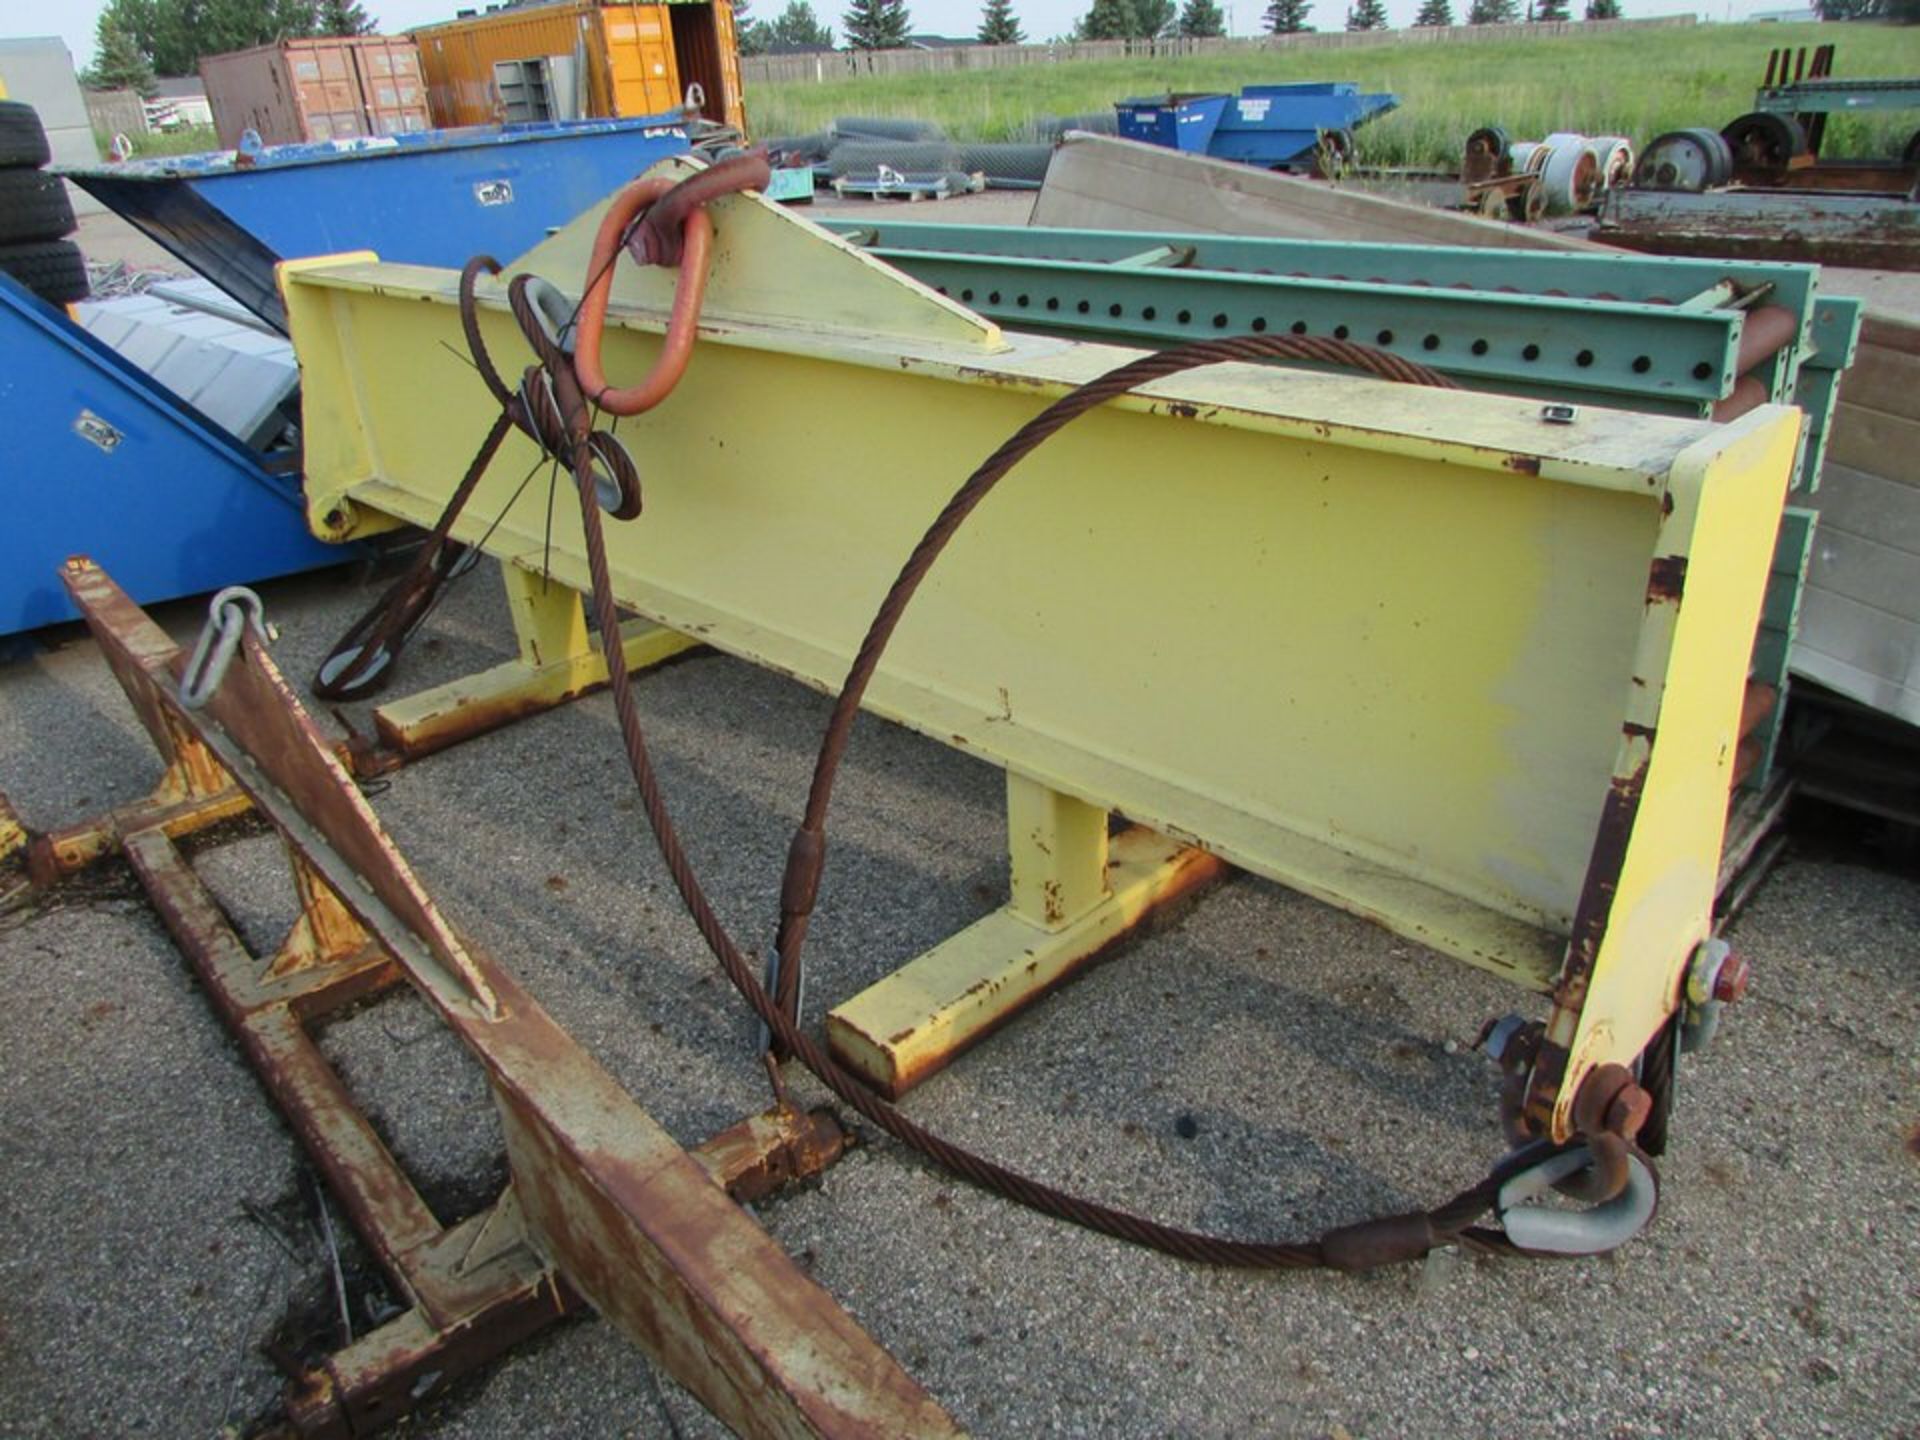 (3) Spreader Bar Lifting Attachments, 14', 11', 134". Loc. 420 Main Ave E, West Fargo, ND 58078 - Image 4 of 4